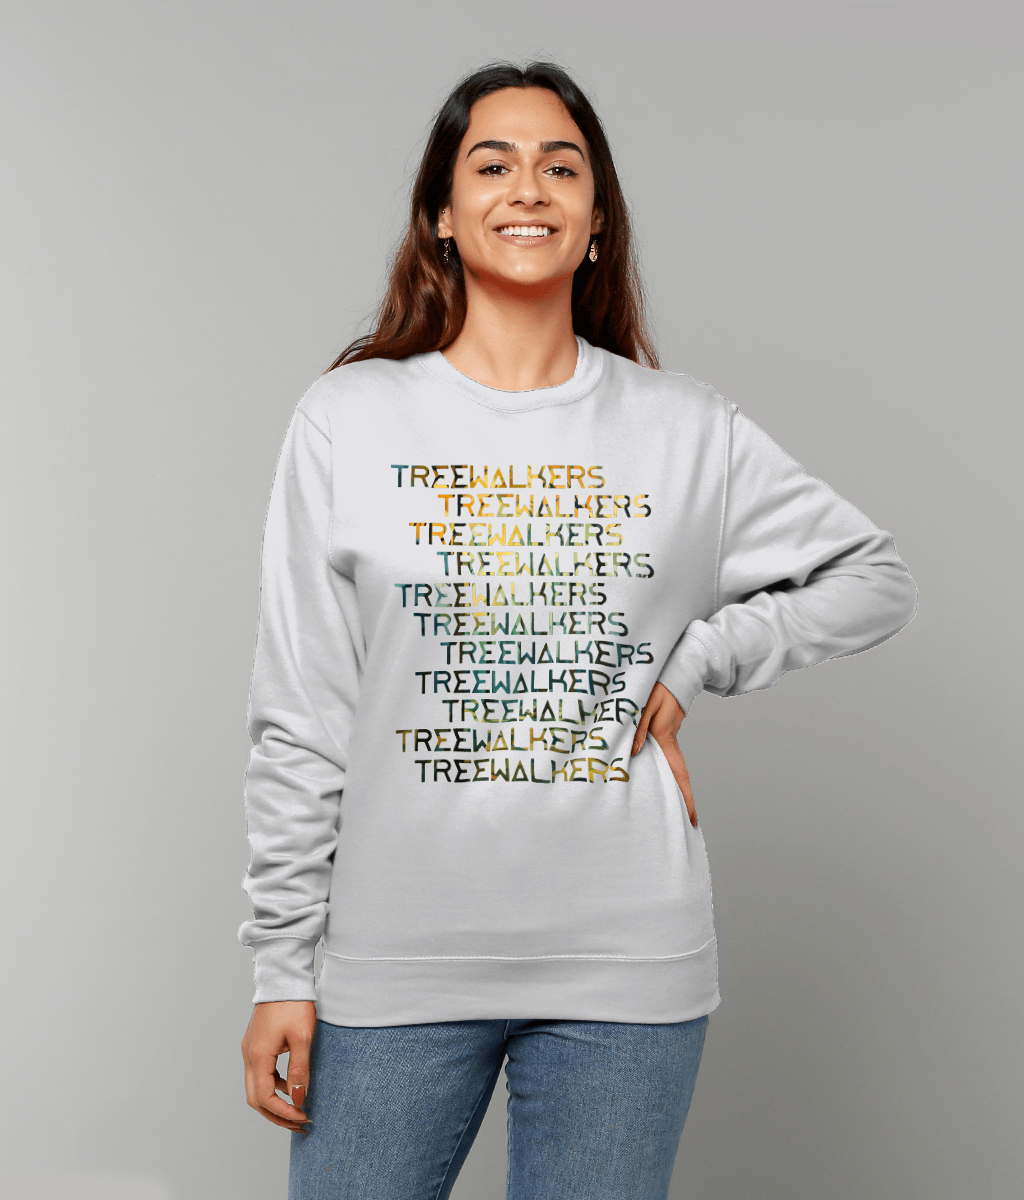 Treewalkers Sunset Forest Graphic Sweater